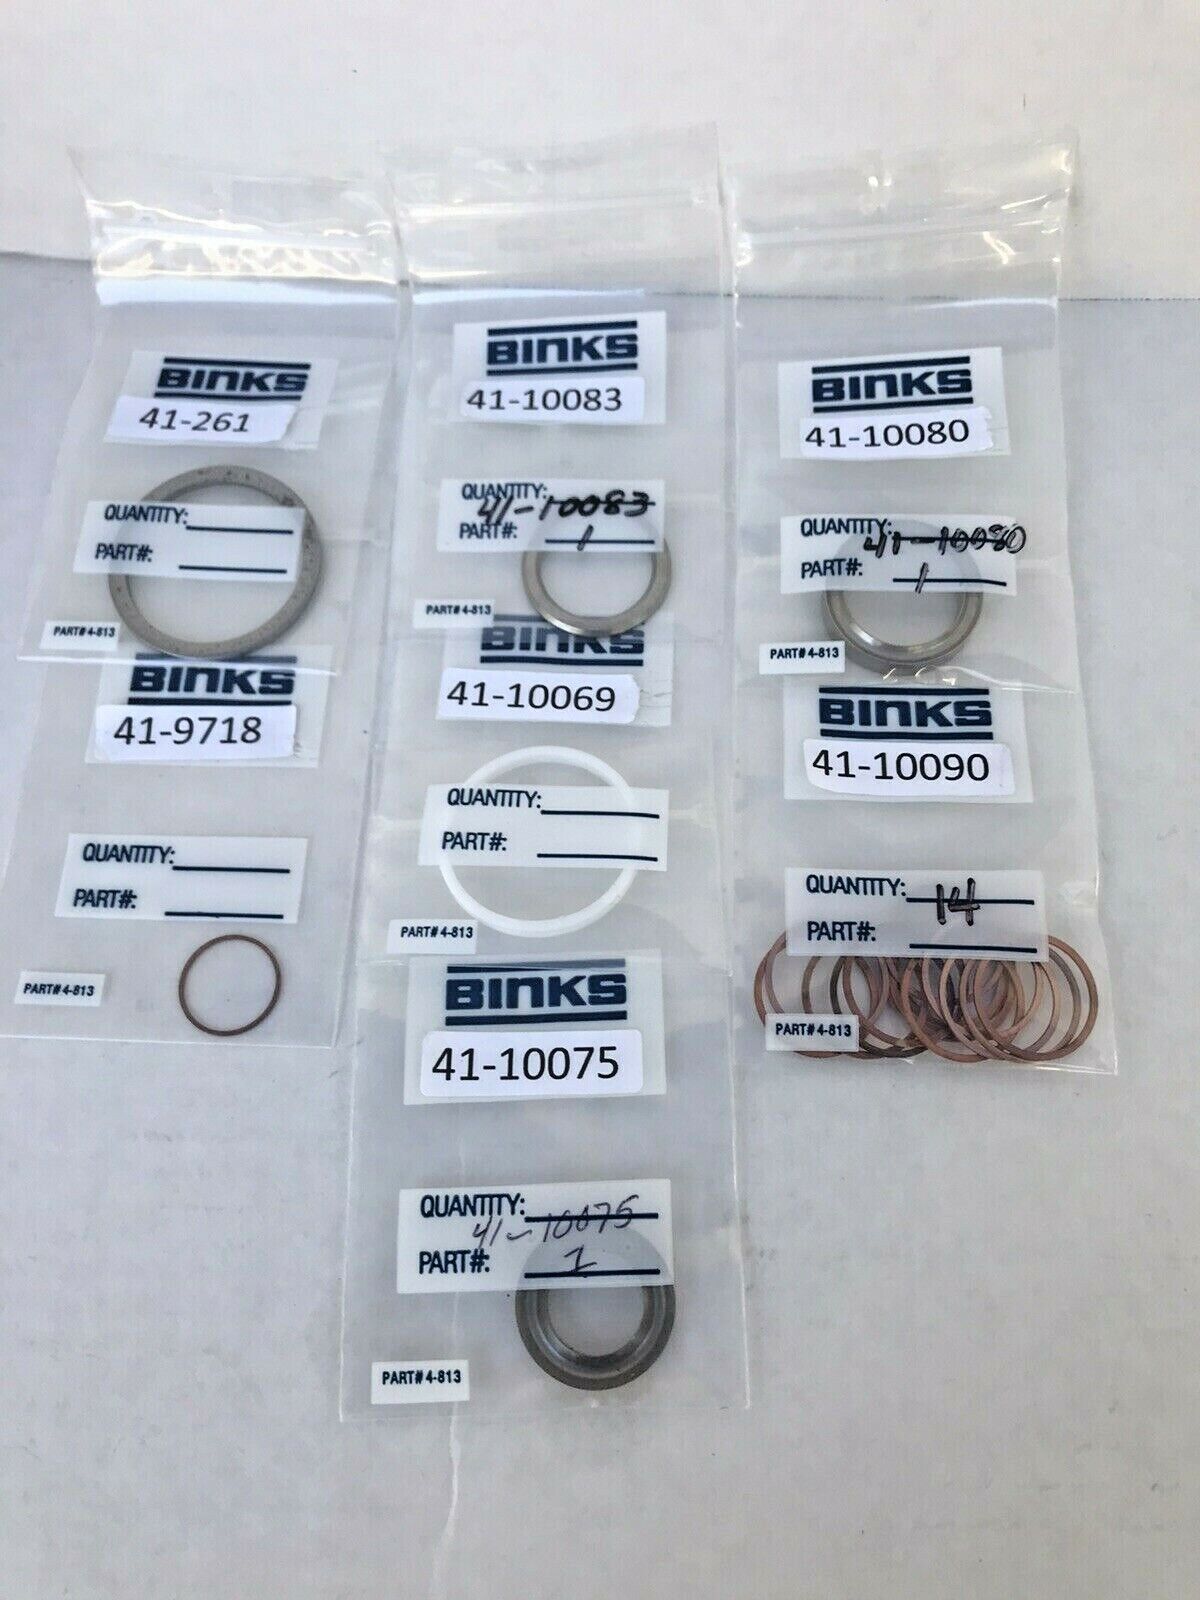 ONE LOT OF 7 BINKS SKU'S = RETAINERS / GLANDS / RETAINERS AND GASKETS - 20 ITEMS Binks 41-10075 / 41-10080 / 41-10083 MORE